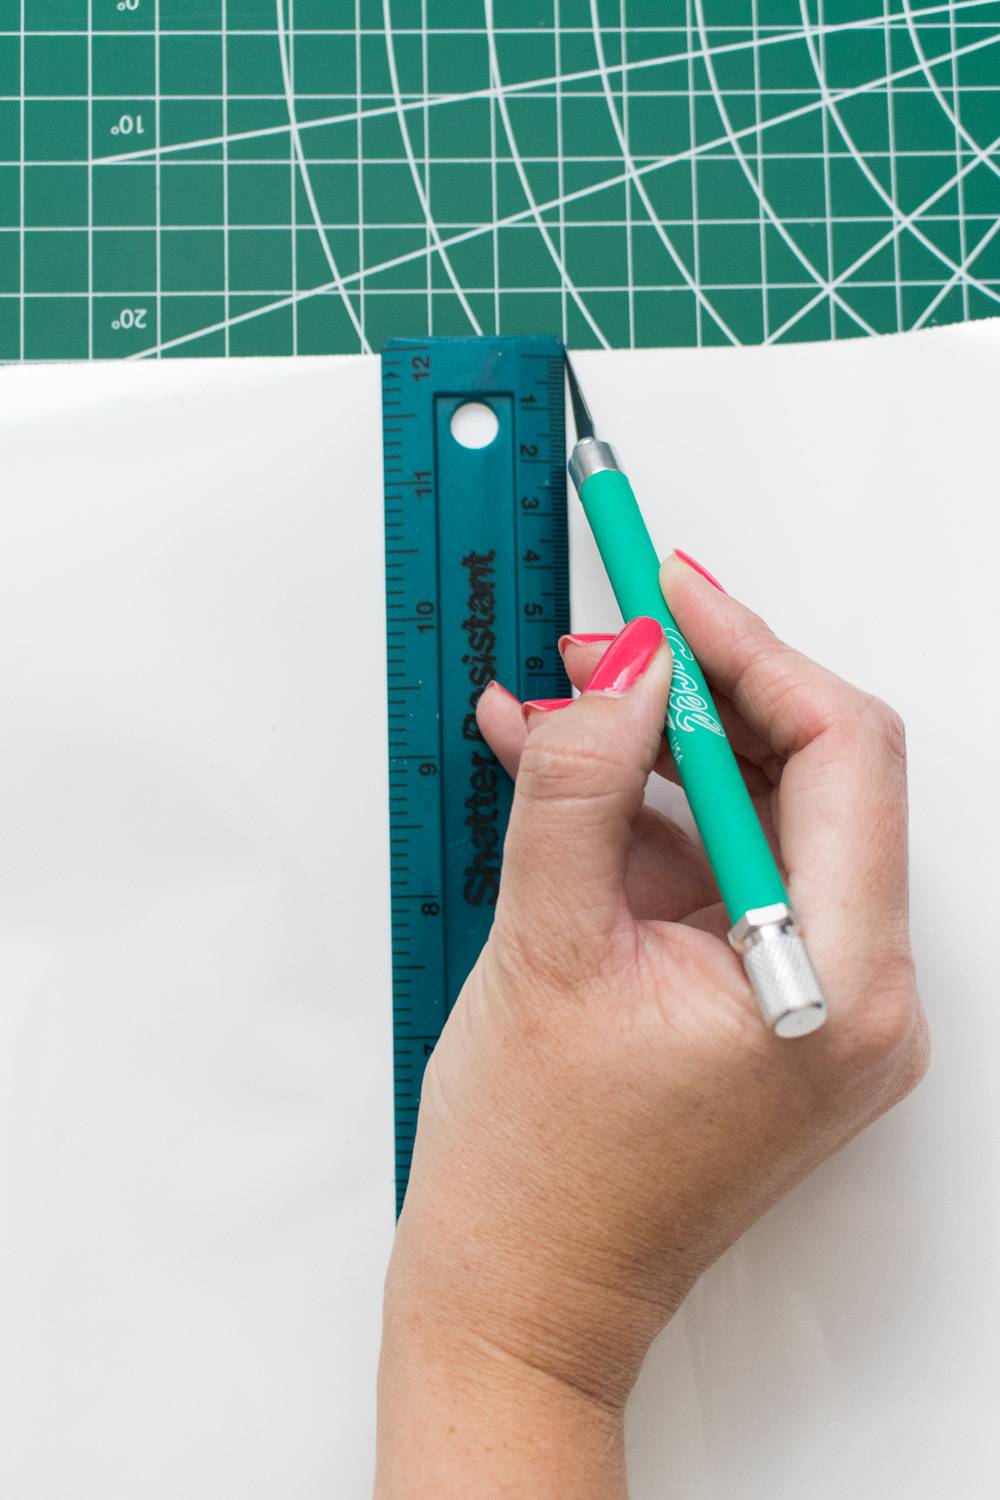 A person using a ruler and a pen knife on a board